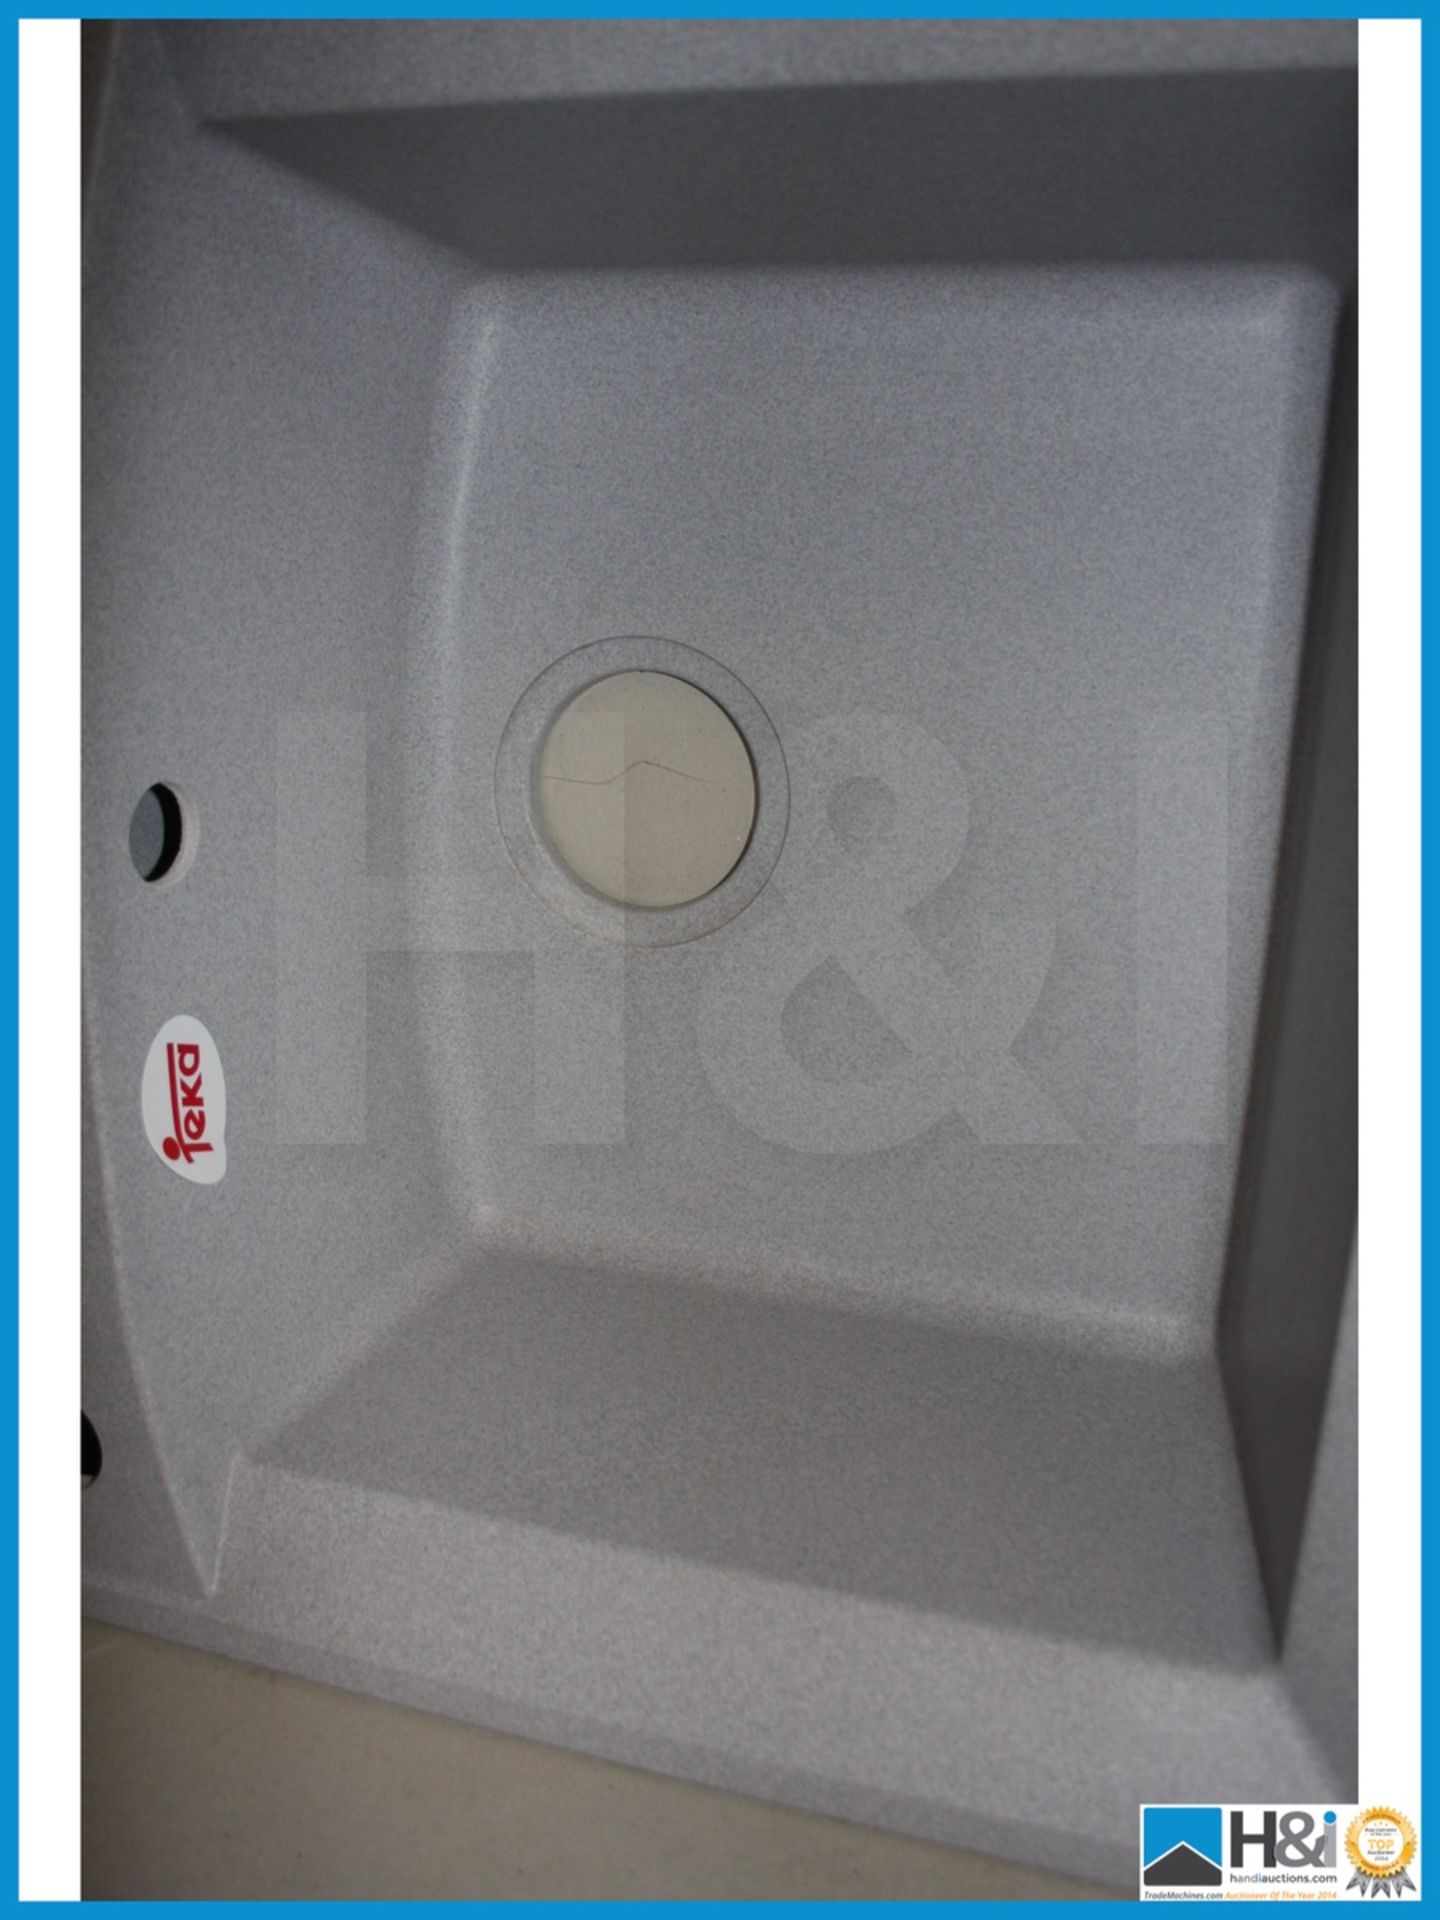 Teka kuchentechnik universo 60 gt gray composite inset kitchen sink with waste and fittings new - Image 5 of 7